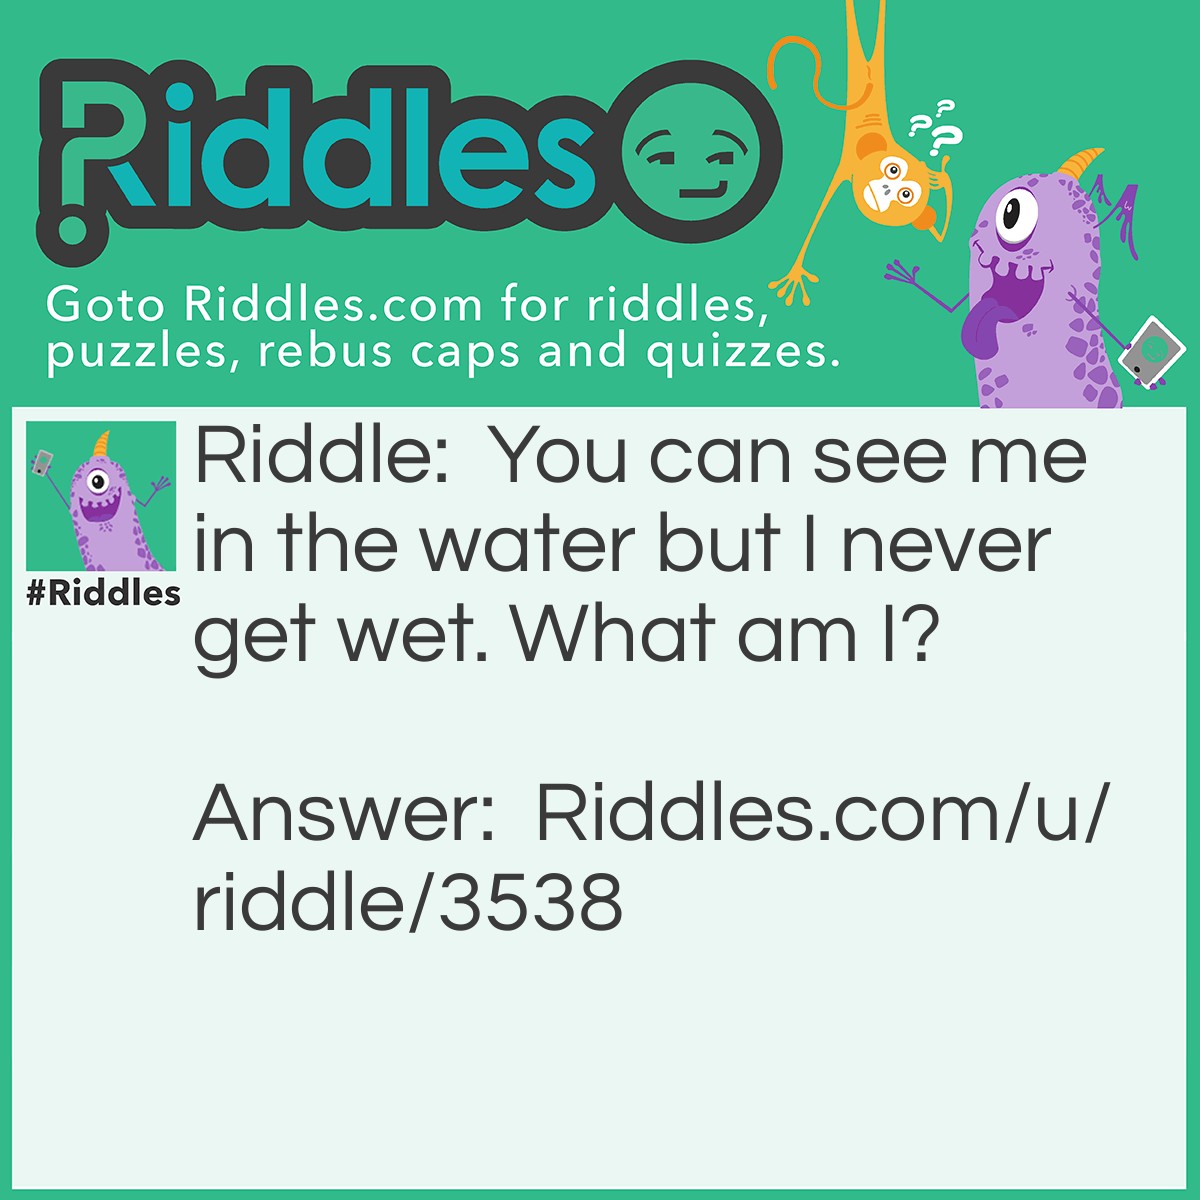 Riddle: You can see me in the water but I never get wet. What am I? Answer: A reflection.